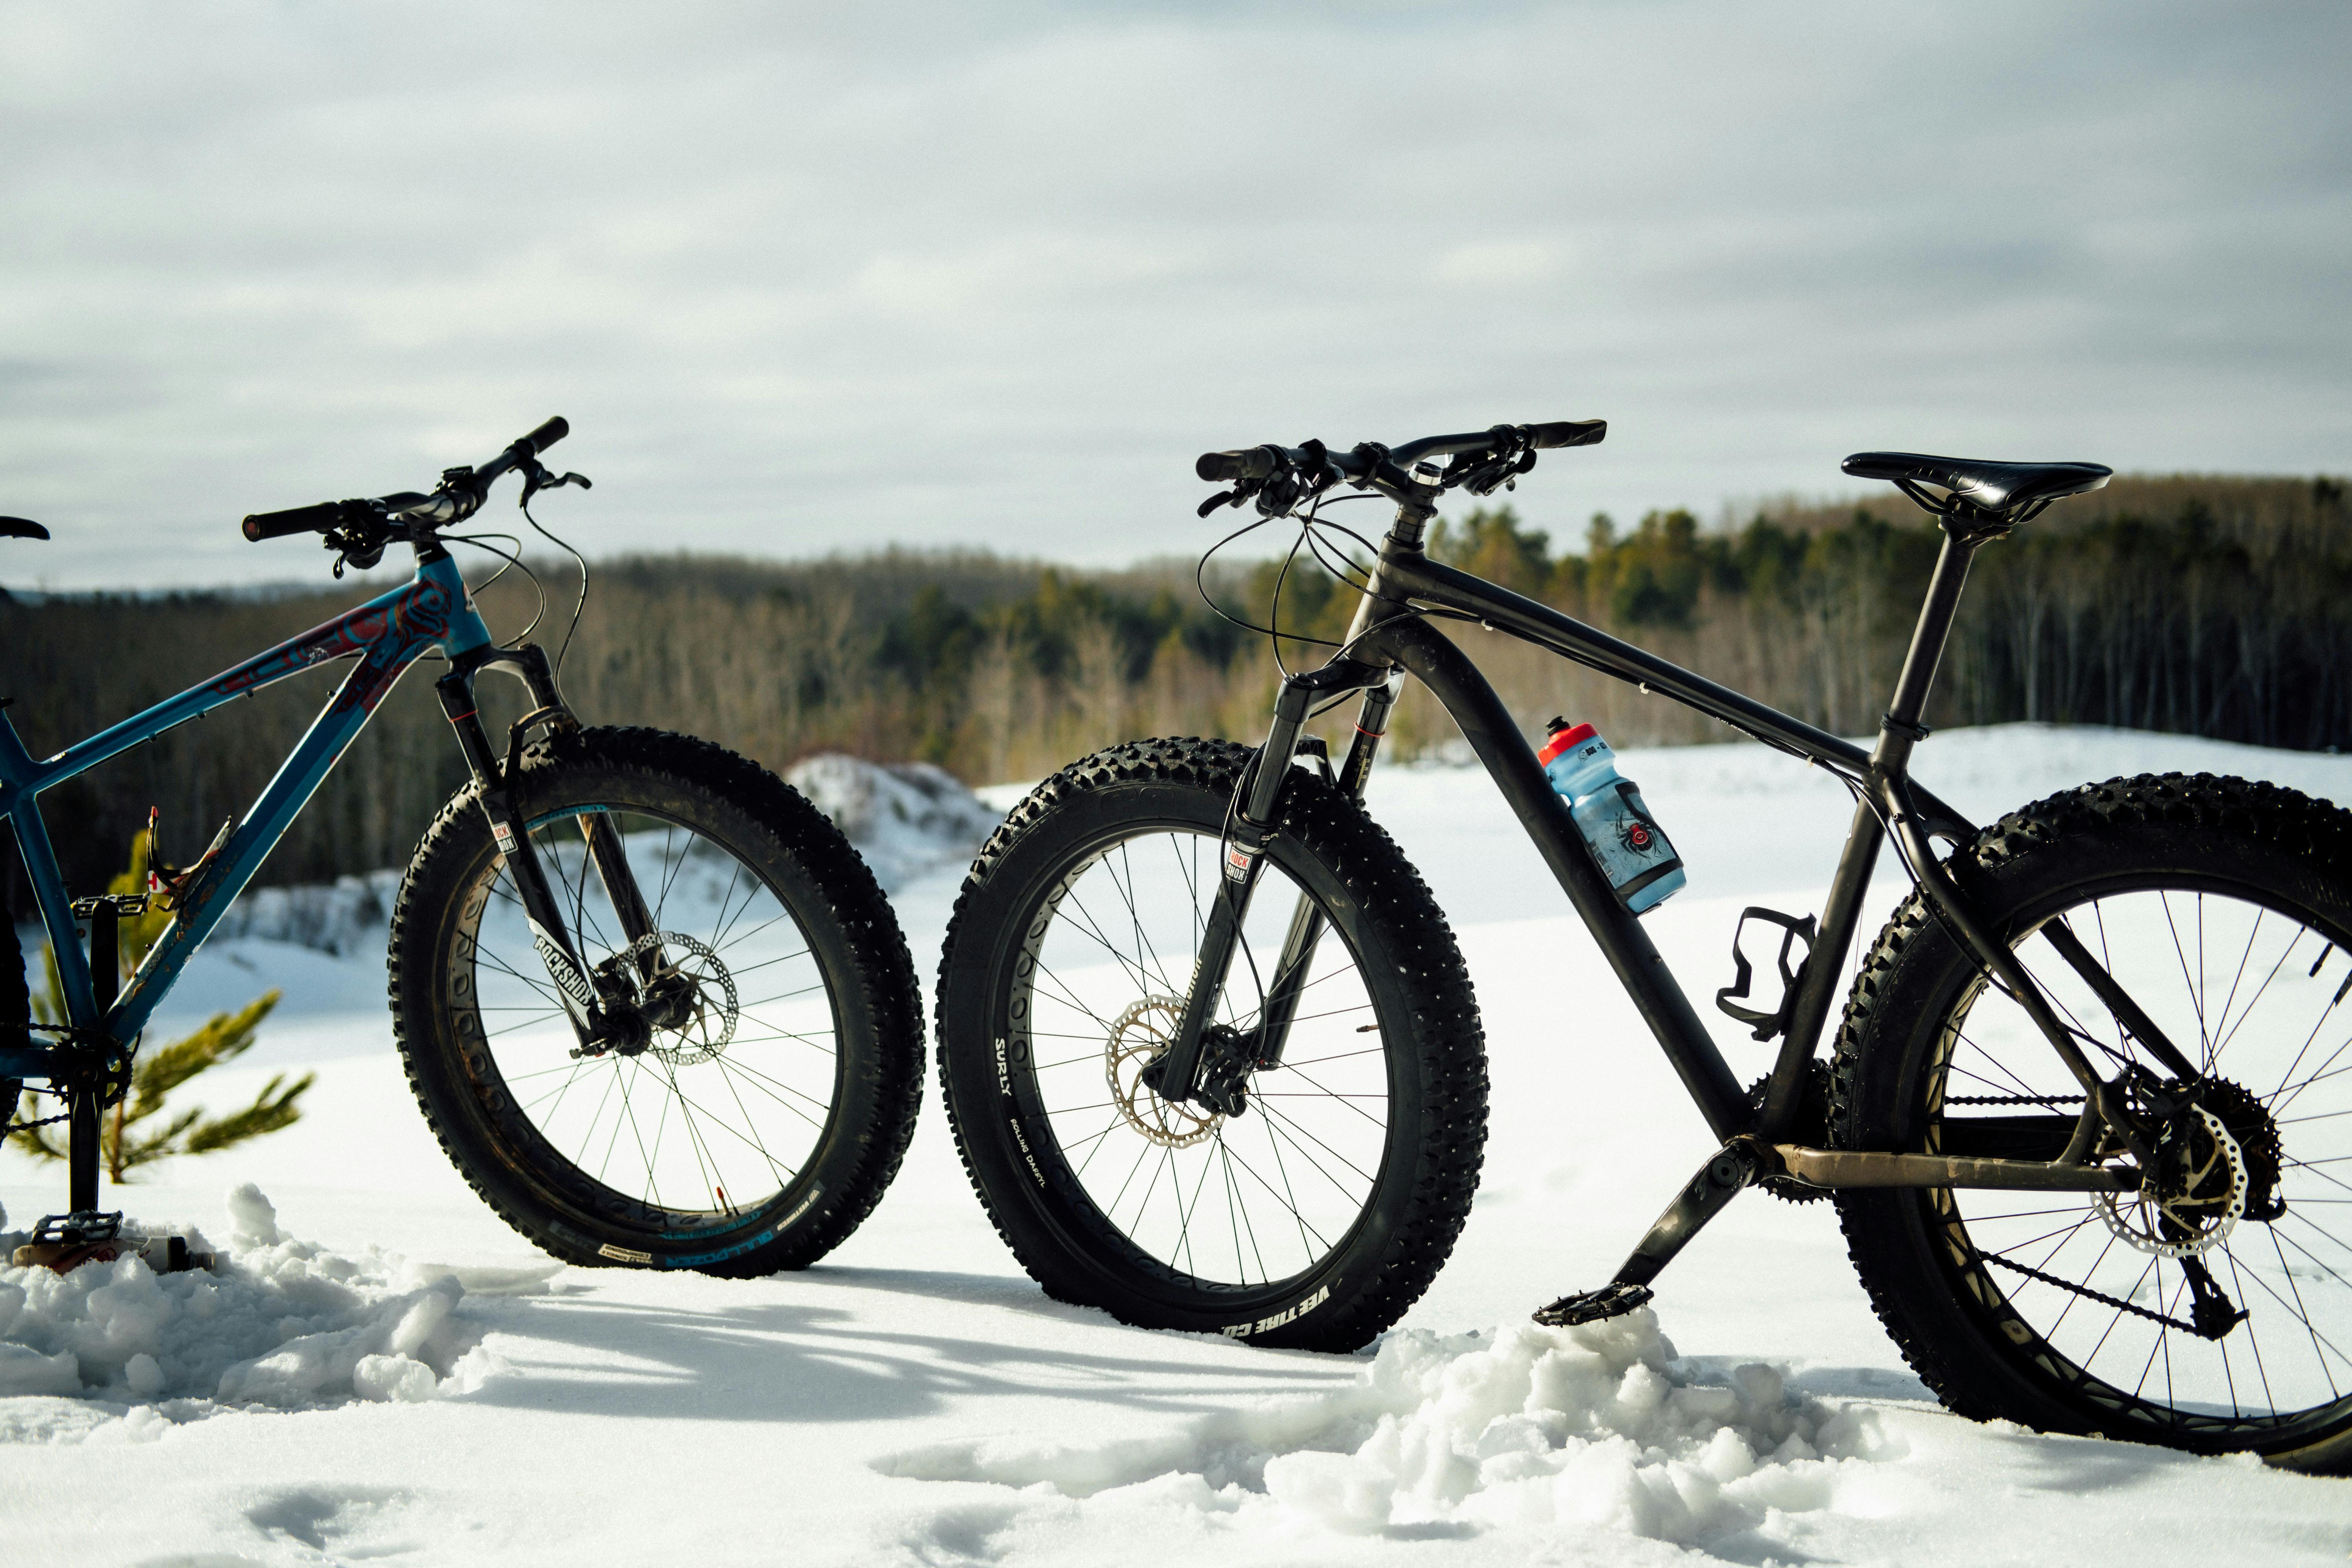 Two fat bikes standing in the snow.